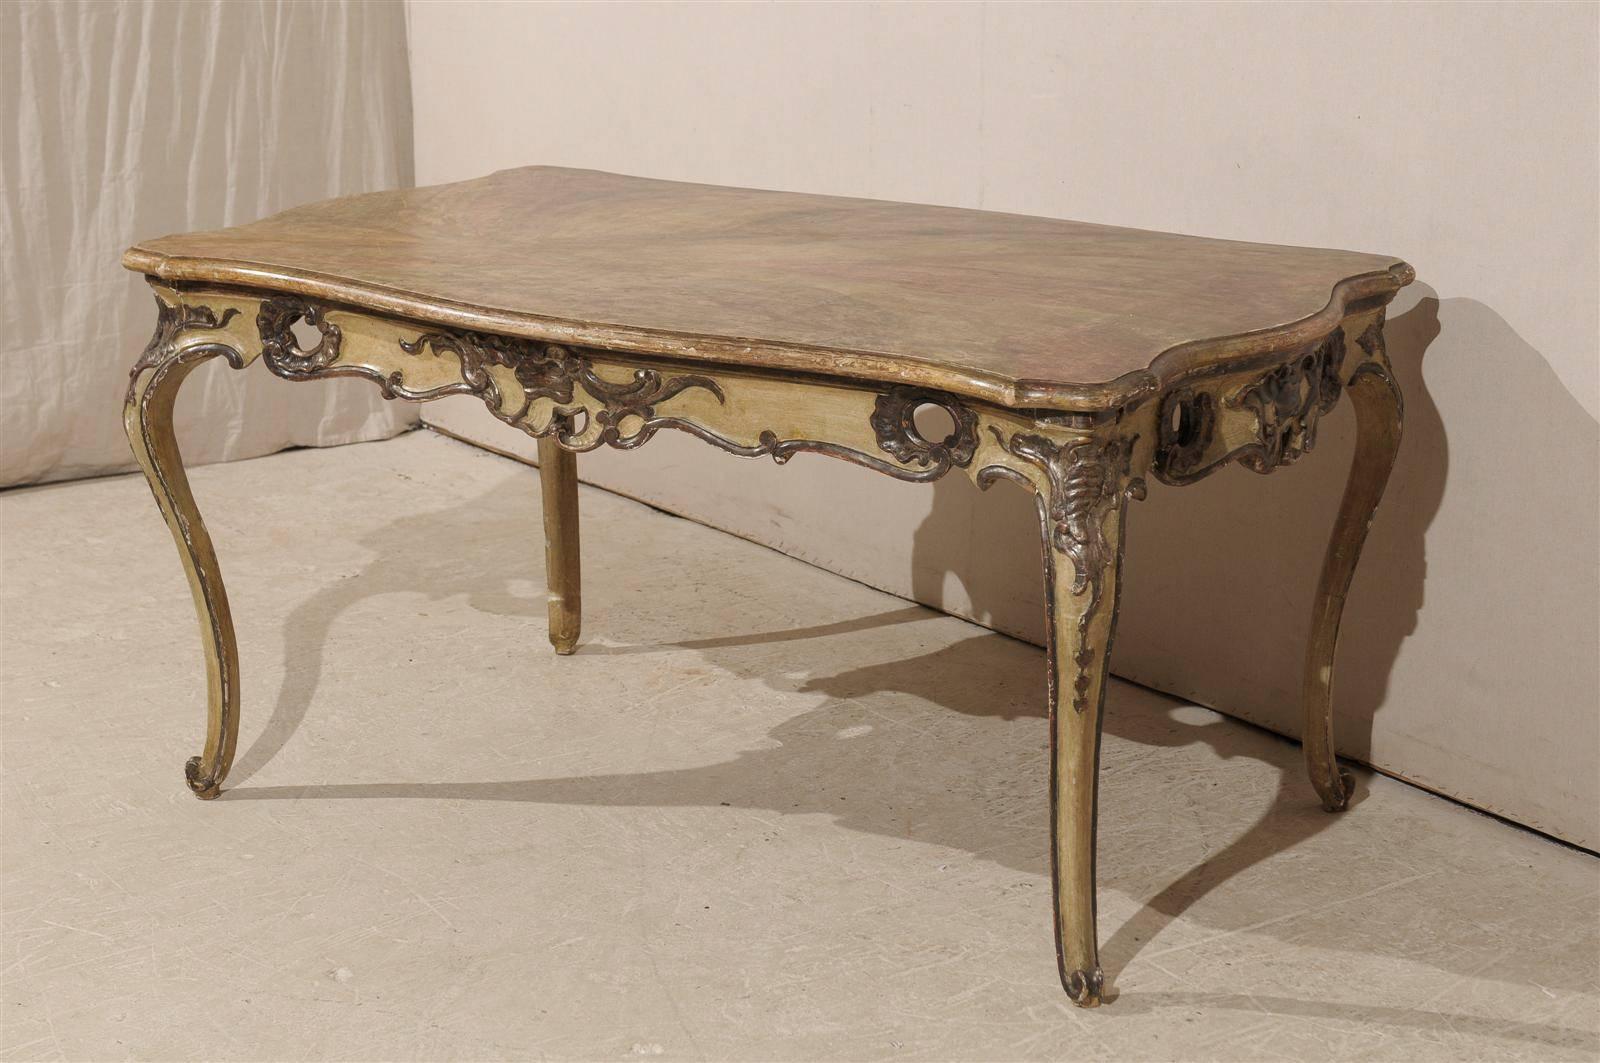 Wood Italian Rococo Style Table, Desk With Faux-Marble Top, 19th Century For Sale